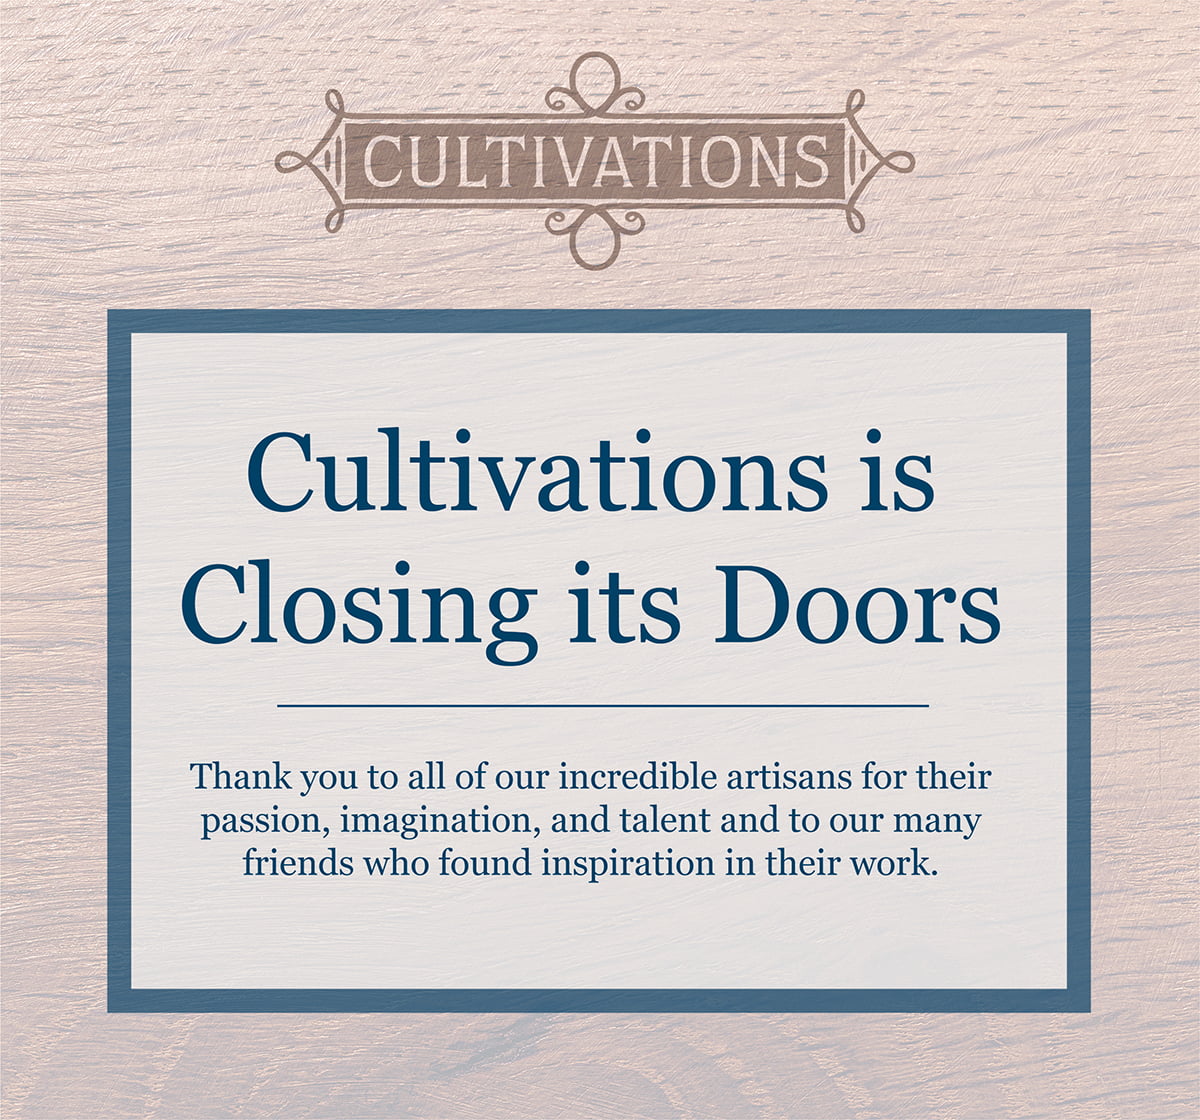 Cultivations is closing its doors. Thank you to all of our incredible artisans for their passion, imagination, and talent and to our many friends who found inspriation in their work.